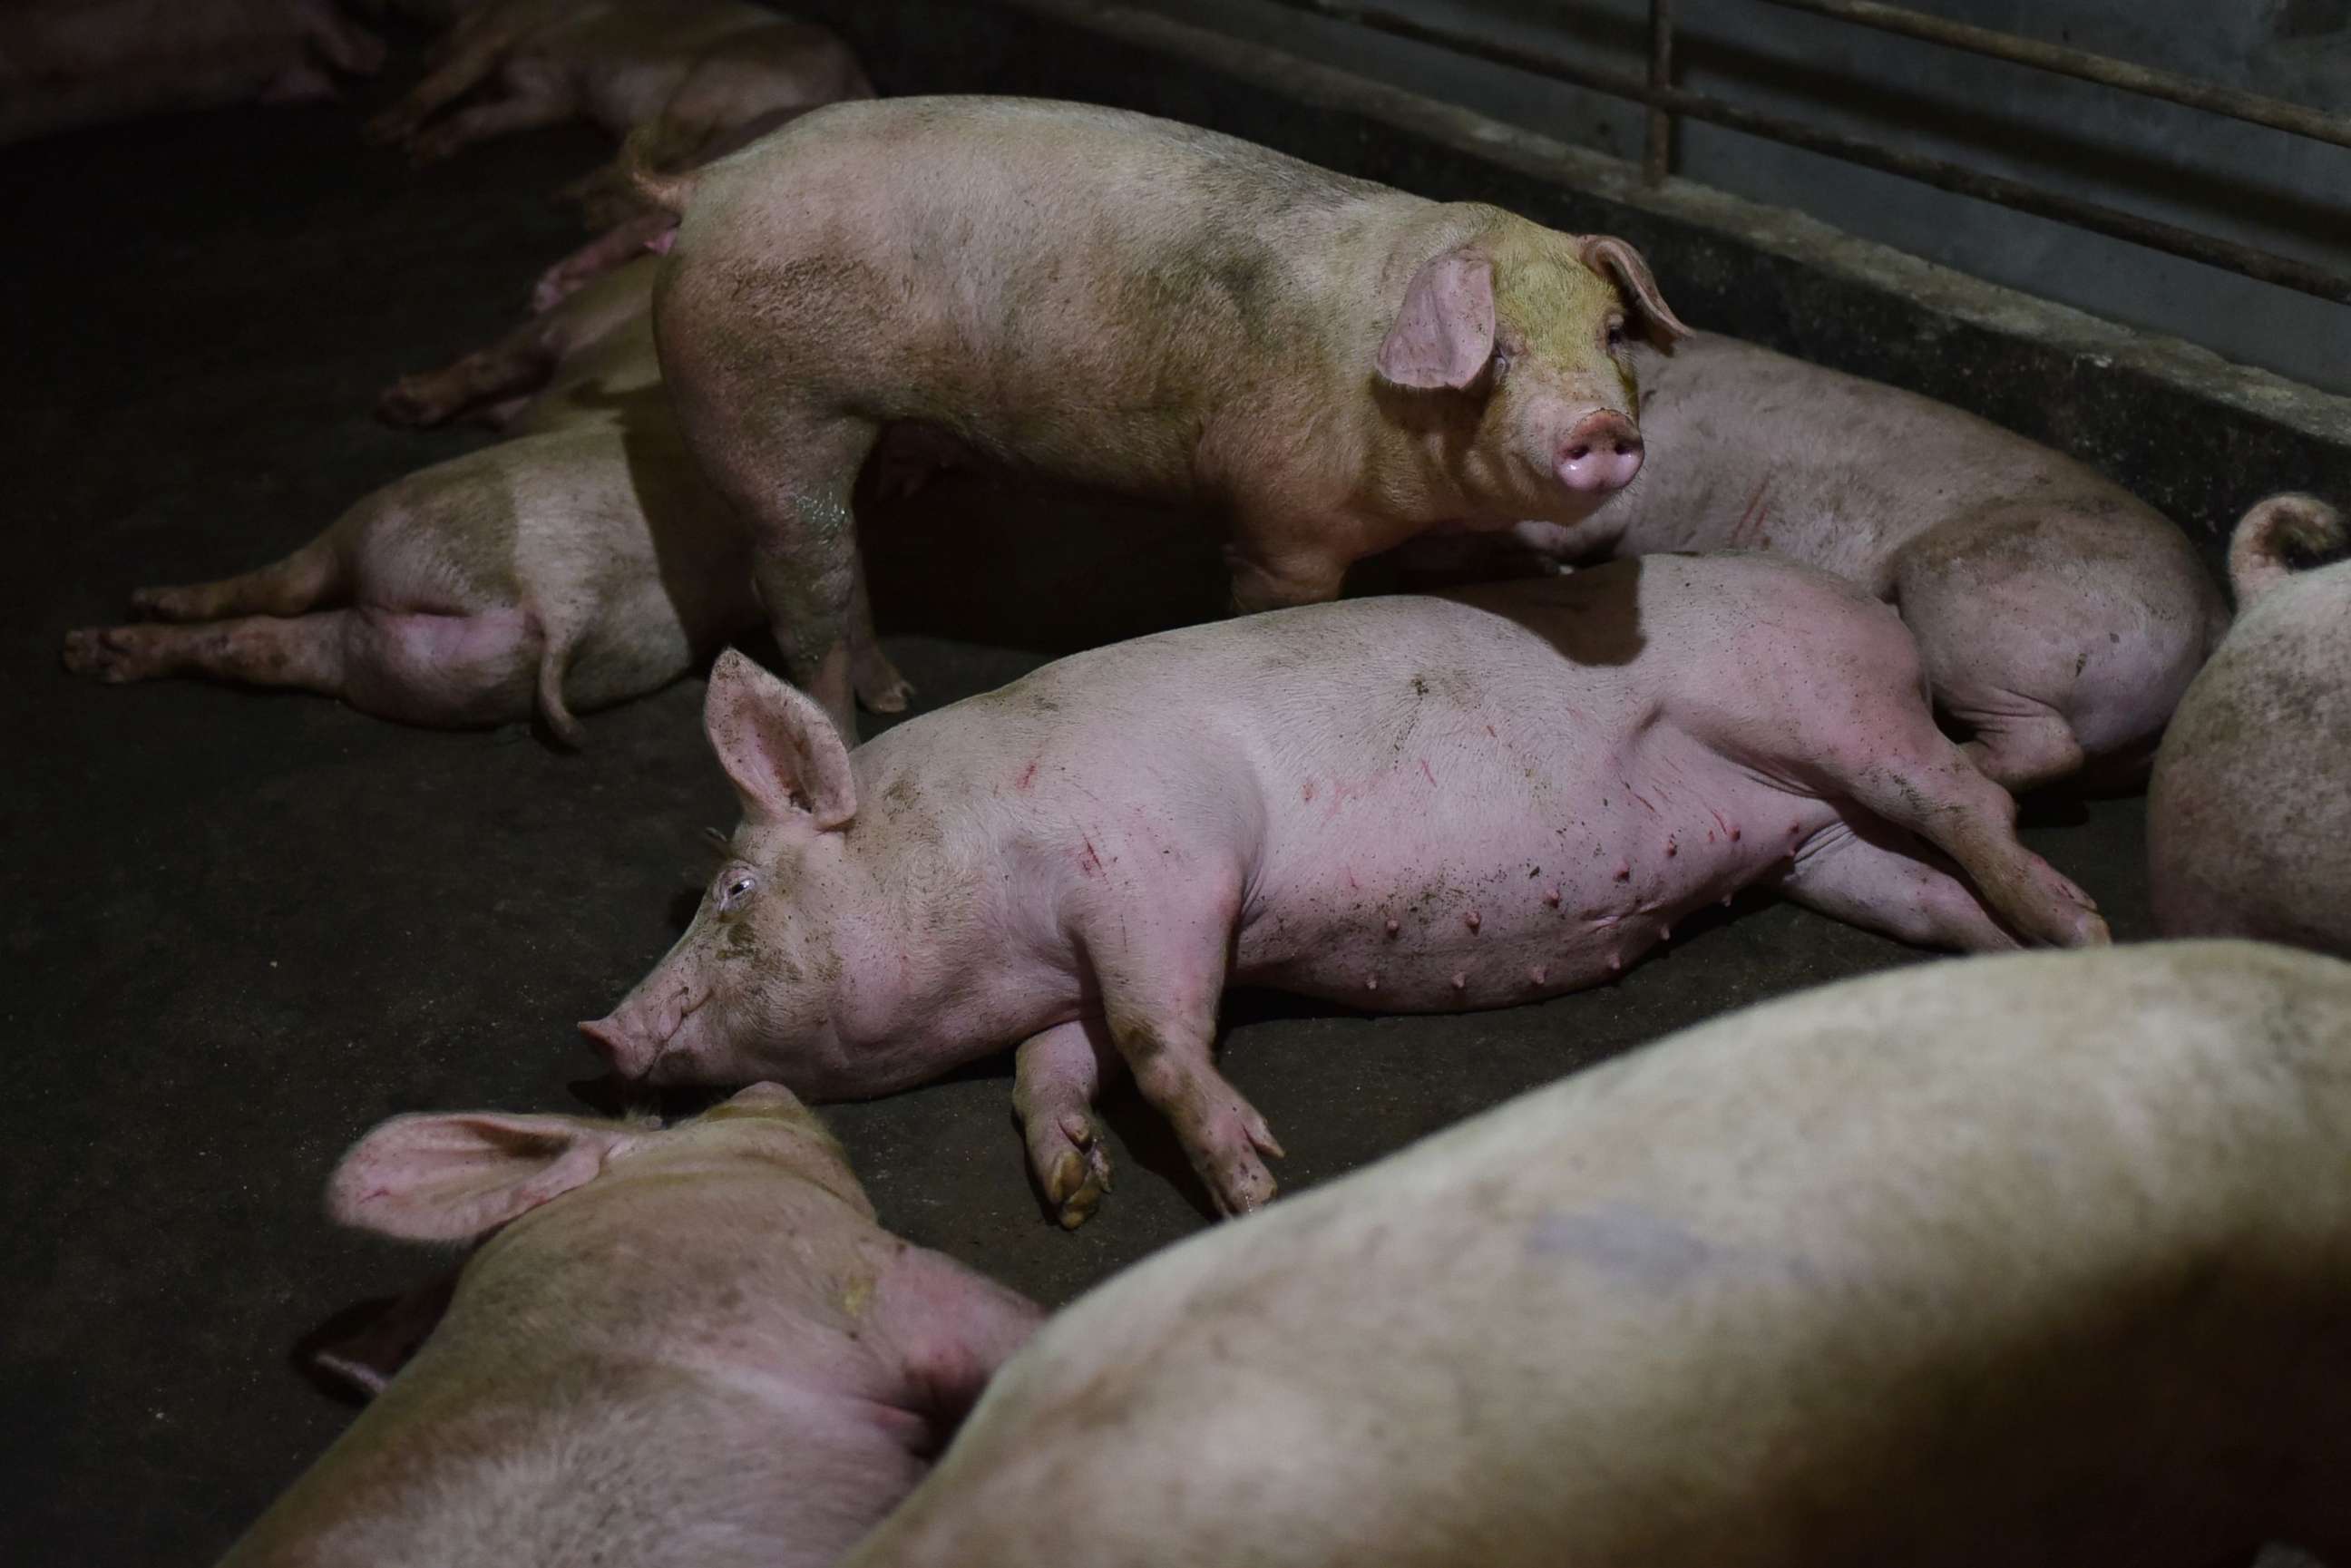 PHOTO: This file photo from Aug. 10, 2018, shows pigs resting in a pen in China's central Henan province. Researchers in China have discovered a new type of swine flu capable of triggering a pandemic, according to a study published June 29, 2020, in PNAS.